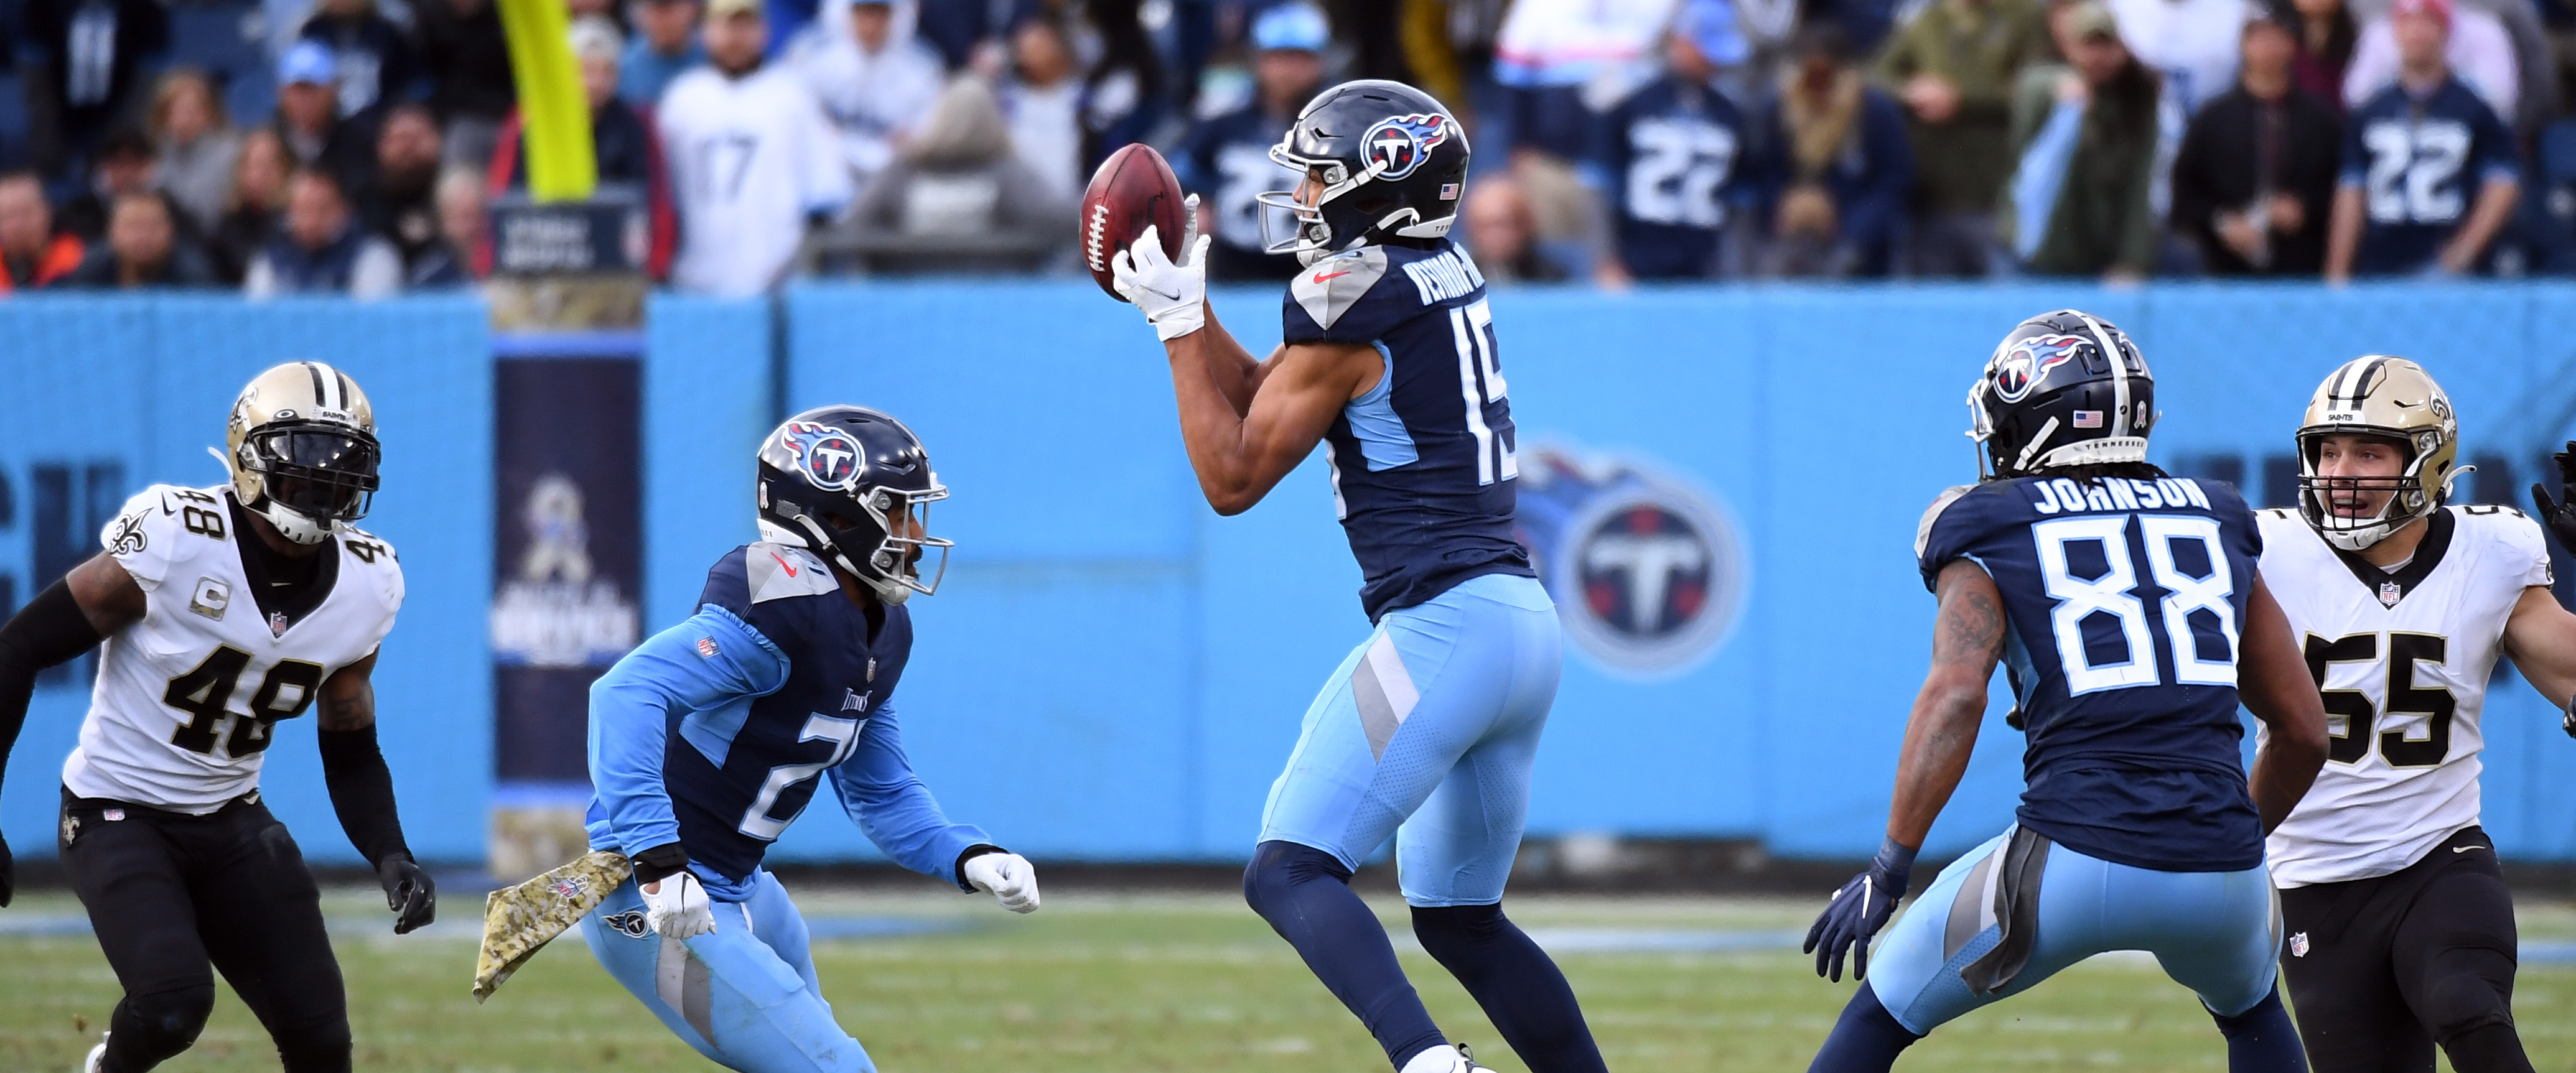 Titans: 3 takeaways from the win over the Saints